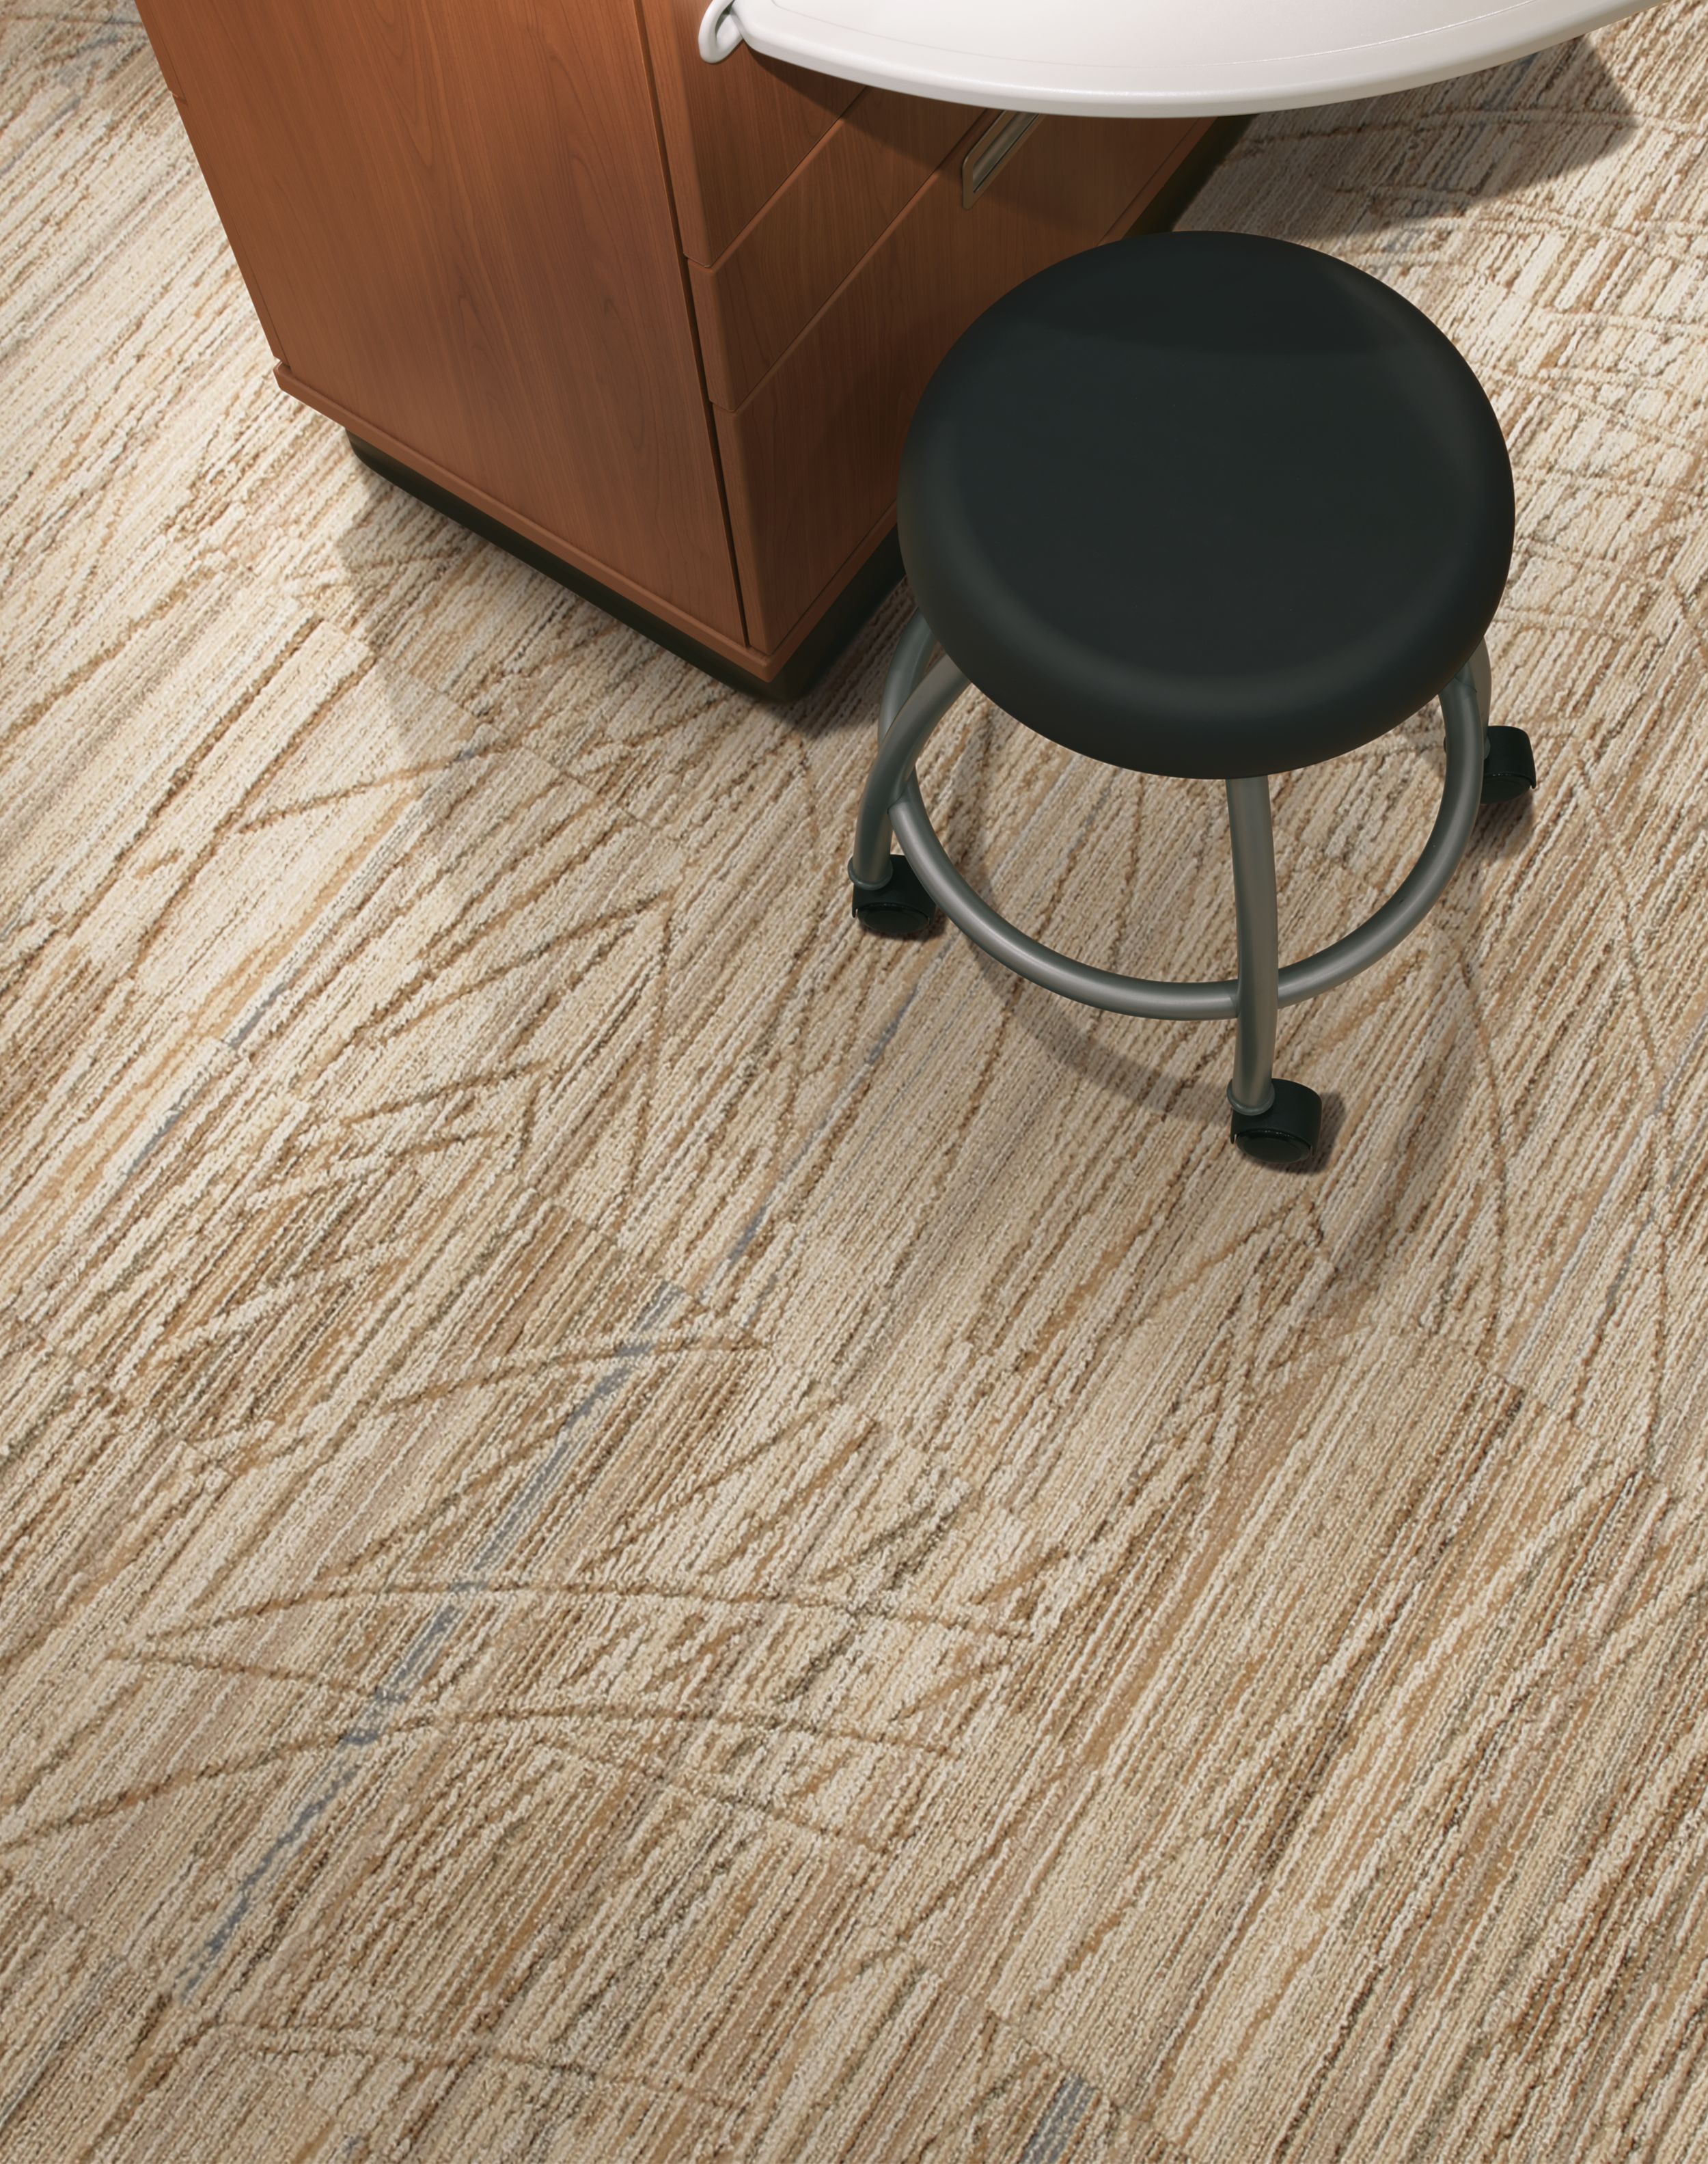 Interface Prairie Grass carpet tile in close up view with stool and cabinet numéro d’image 6